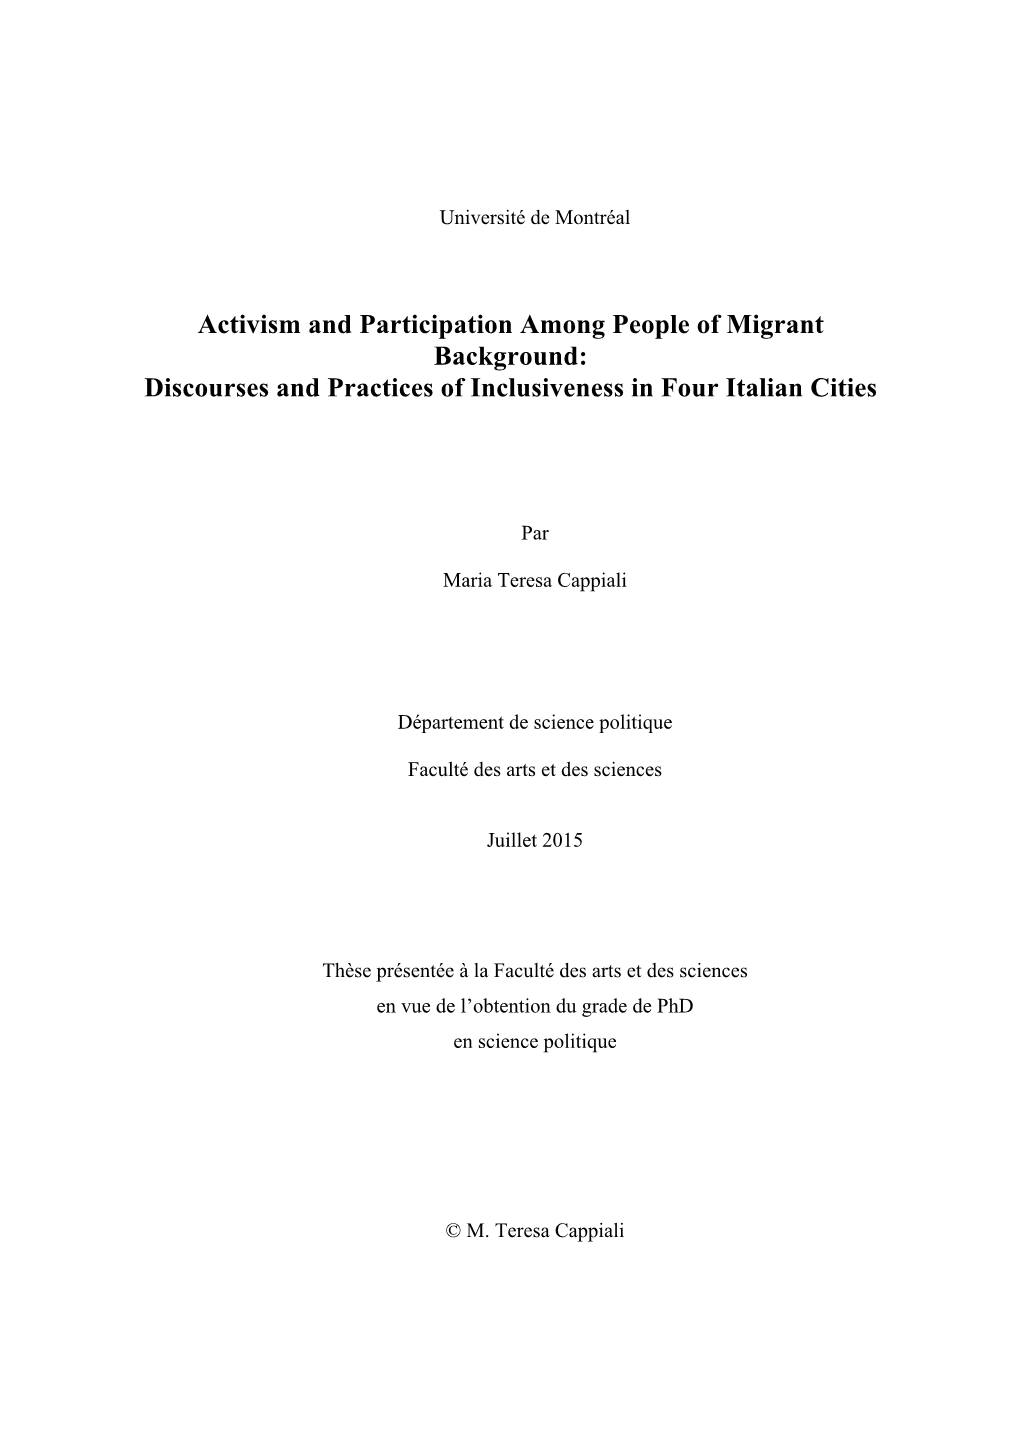 Activism and Participation Among People of Migrant Background: Discourses and Practices of Inclusiveness in Four Italian Cities